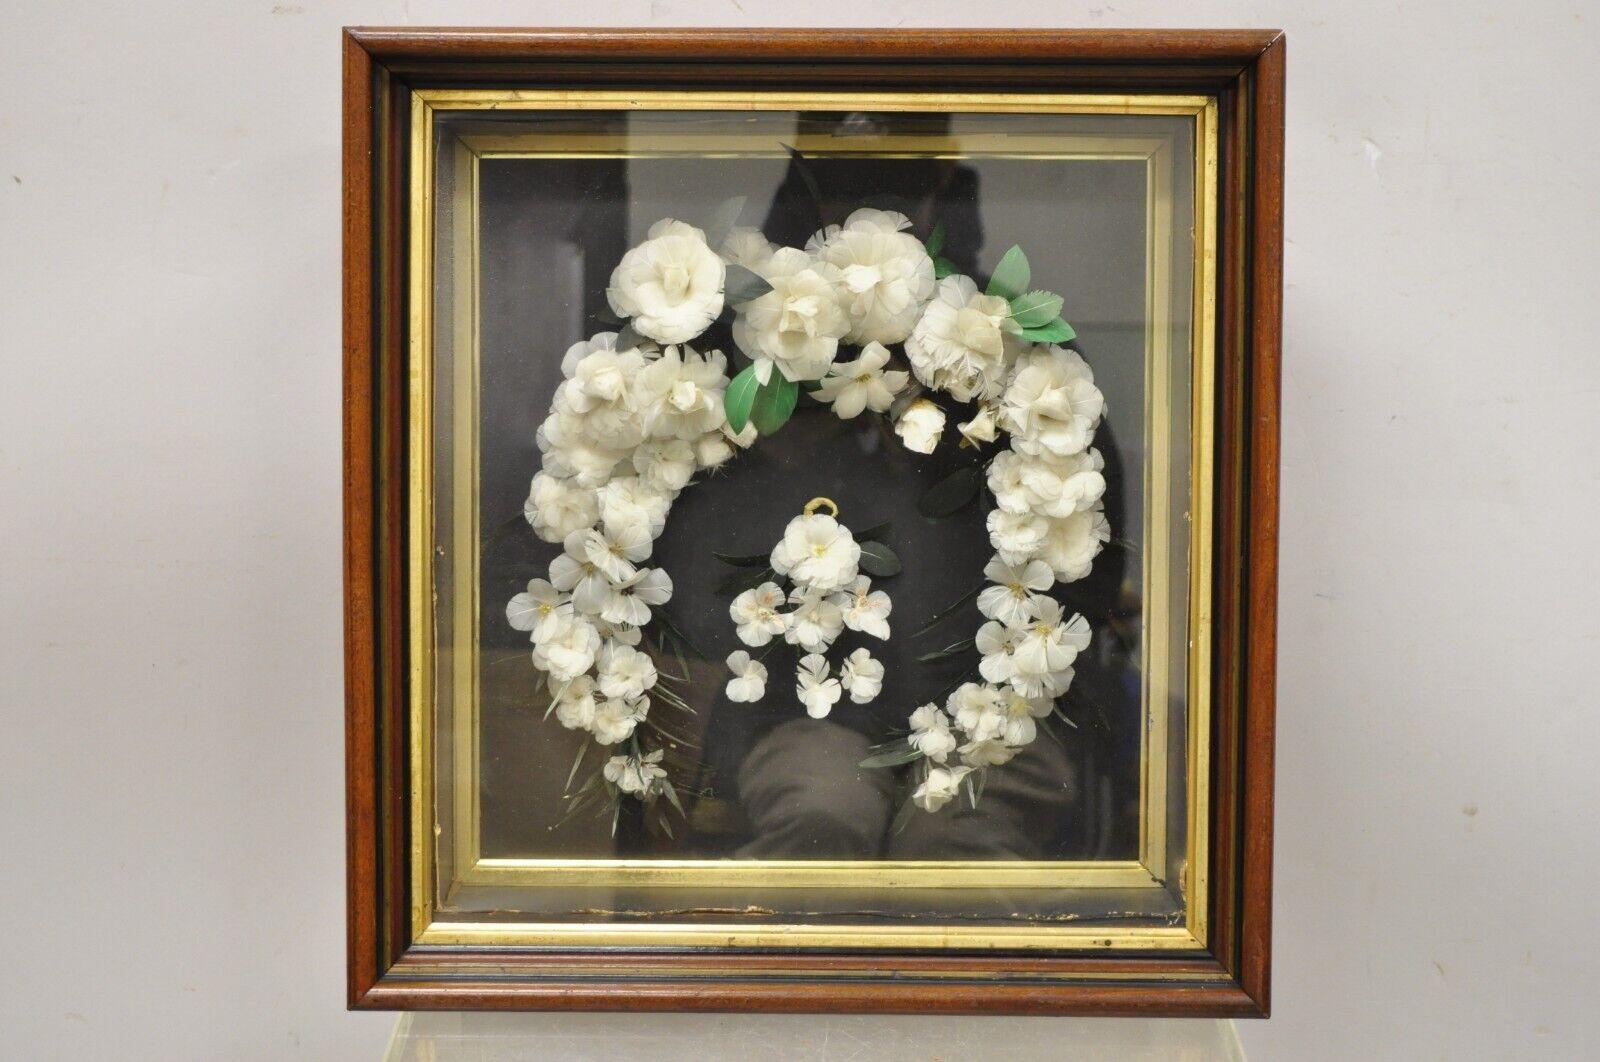 Antique Victorian white feather floral mourning wreath mahogany wood shadow box. Item features an ornate white feather flower arrangement, mahogany wood frame, glass front, very nice antique item. Circa 19th Century. Measurements: 18.5